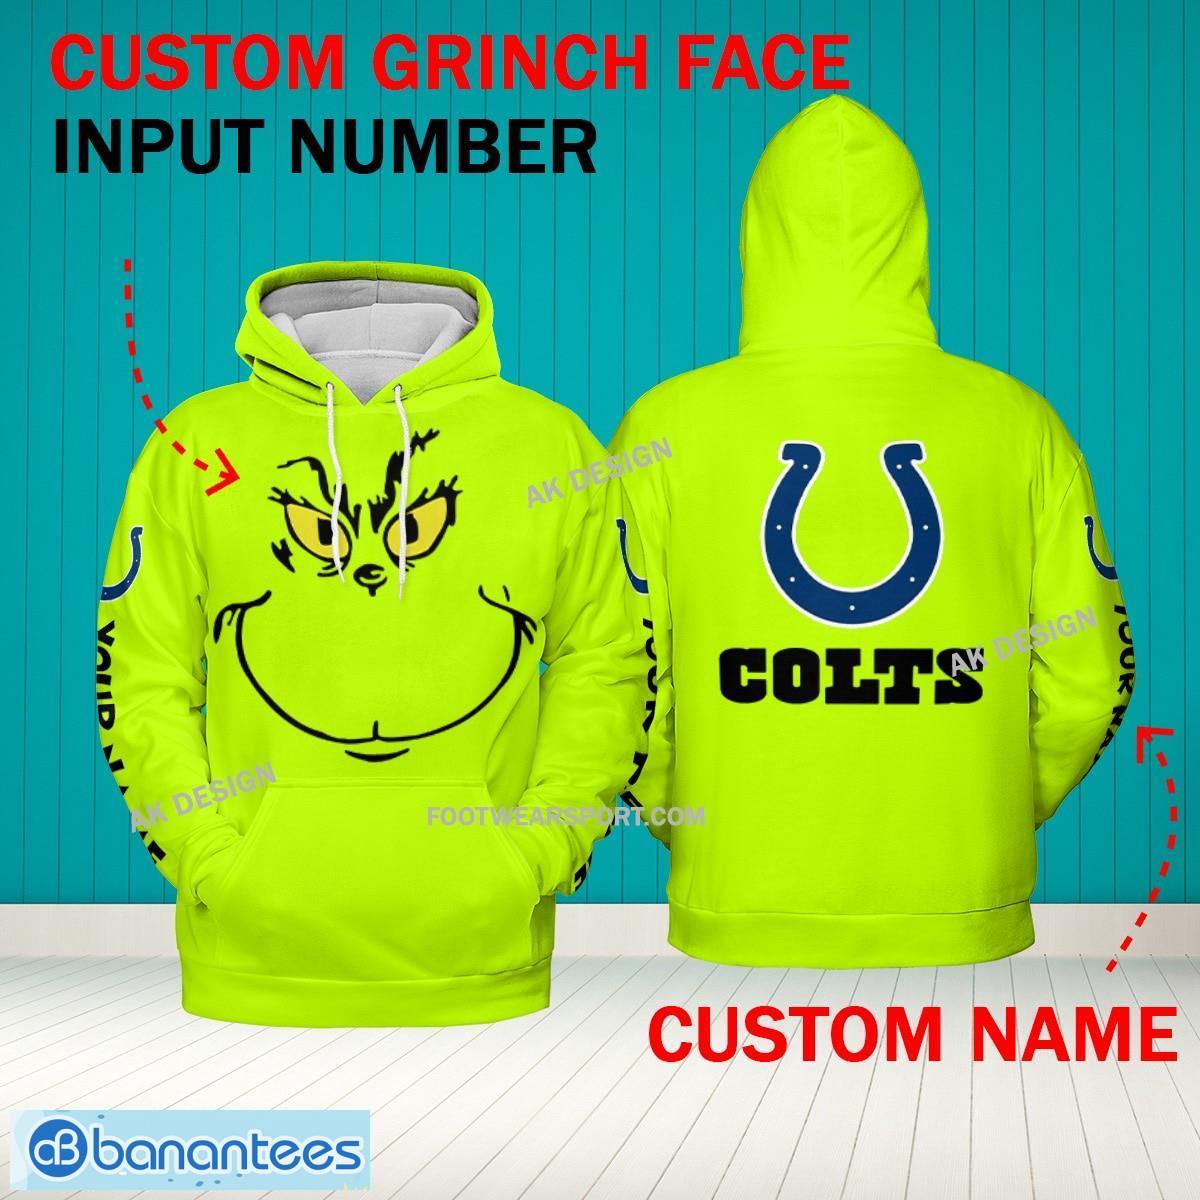 Grinch Face Indianapolis Colts 3D Hoodie, Zip Hoodie, Sweater Green AOP Custom Number And Name - Grinch Face NFL Indianapolis Colts 3D Hoodie